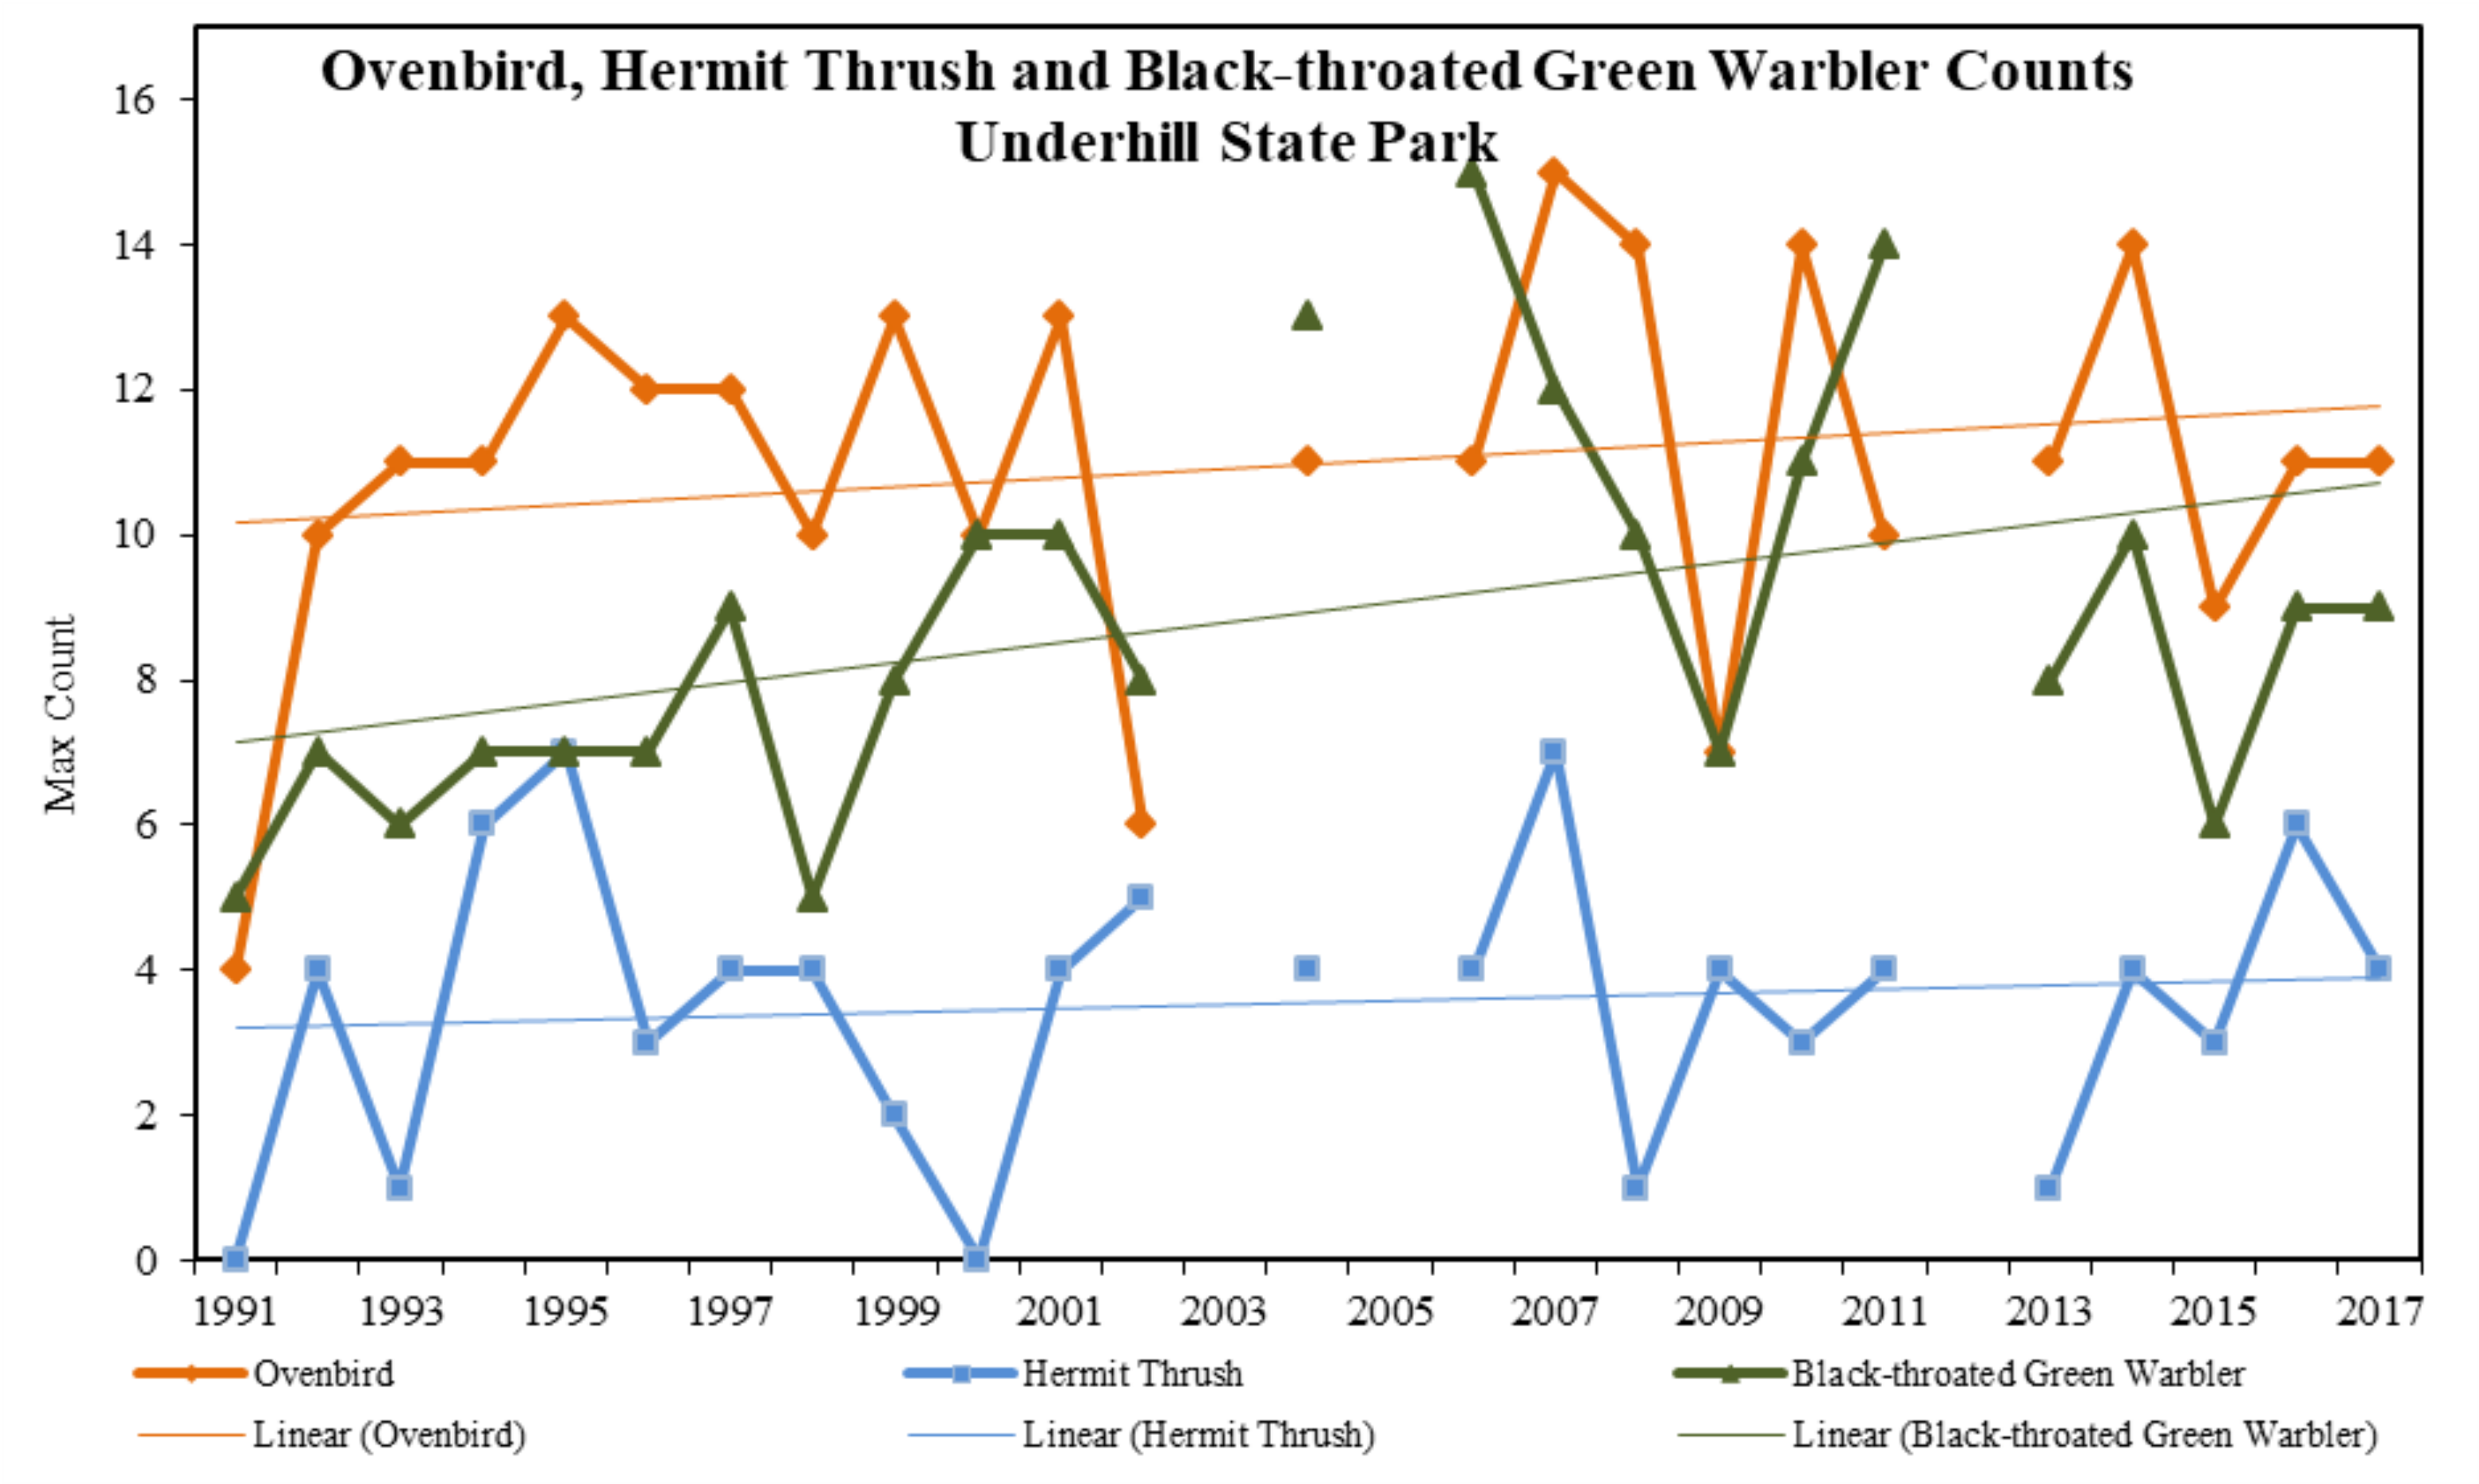 Figure 23. Twenty-six year data and trends for Ovenbird, Hermit Thrush, and Black-throated Green Warbler from annual surveys conducted at Underhill State Park, 1991-2018.